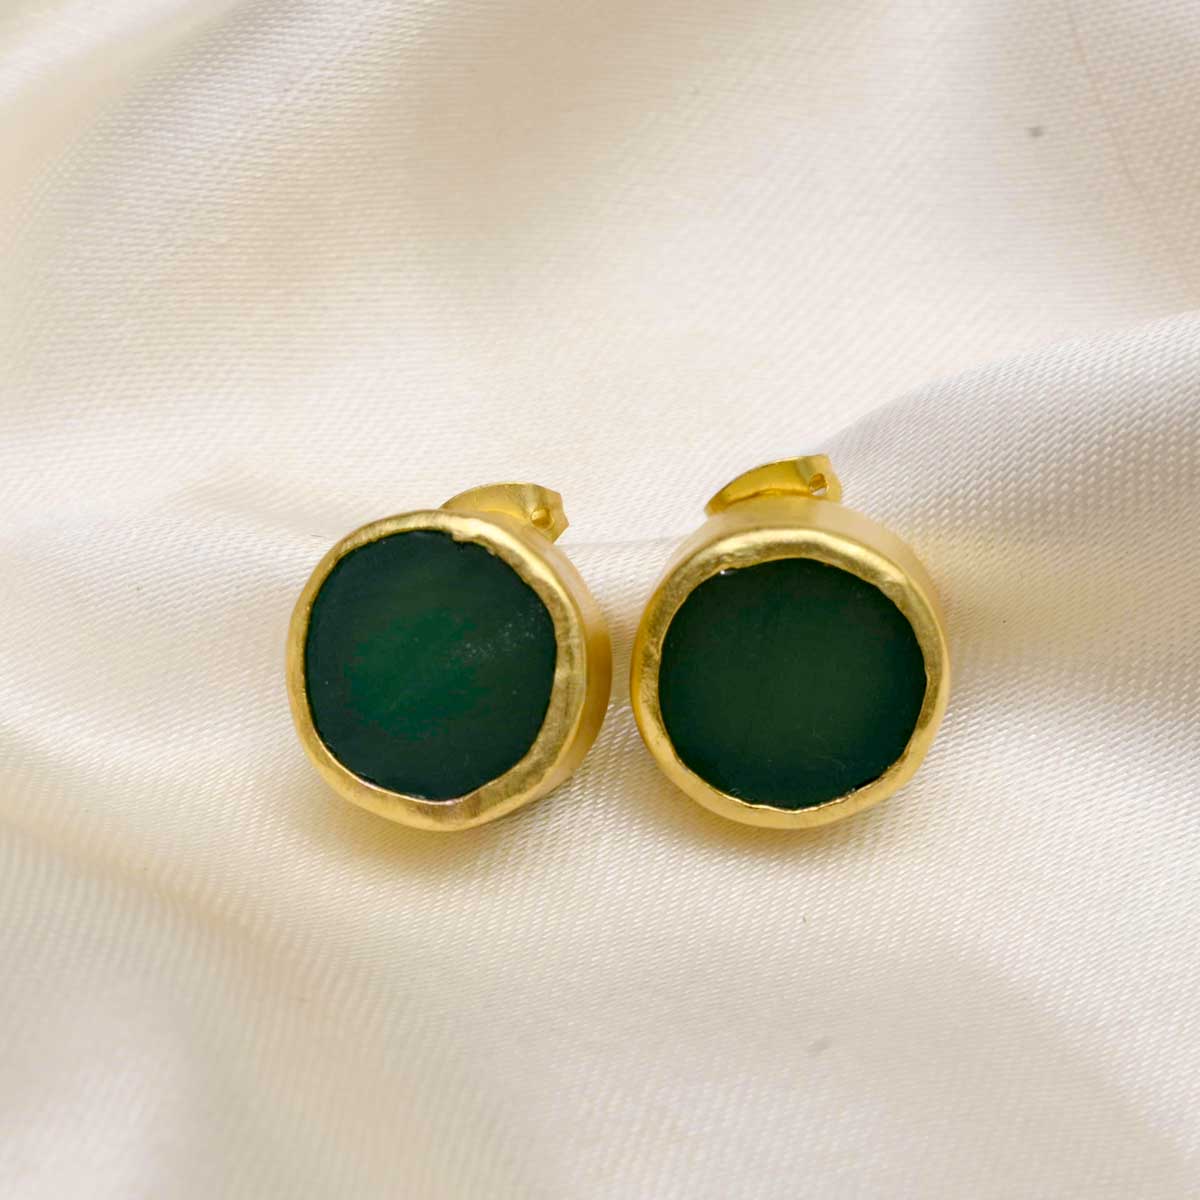 The Spirited Gold Stud Earrings with Green Chalcedony